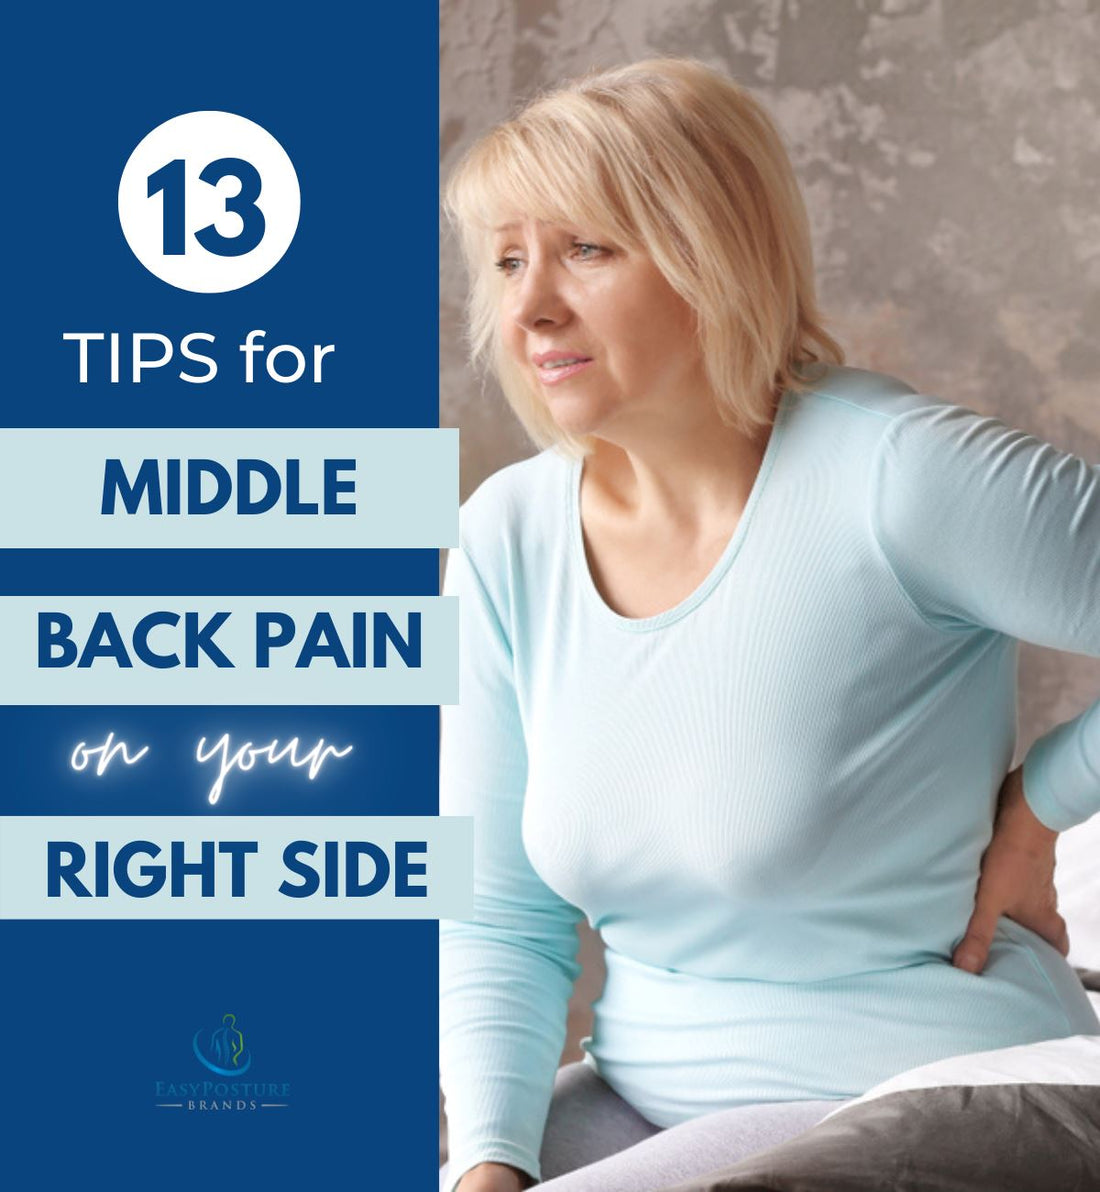 13 Tips for Middle Back Pain on Right Side